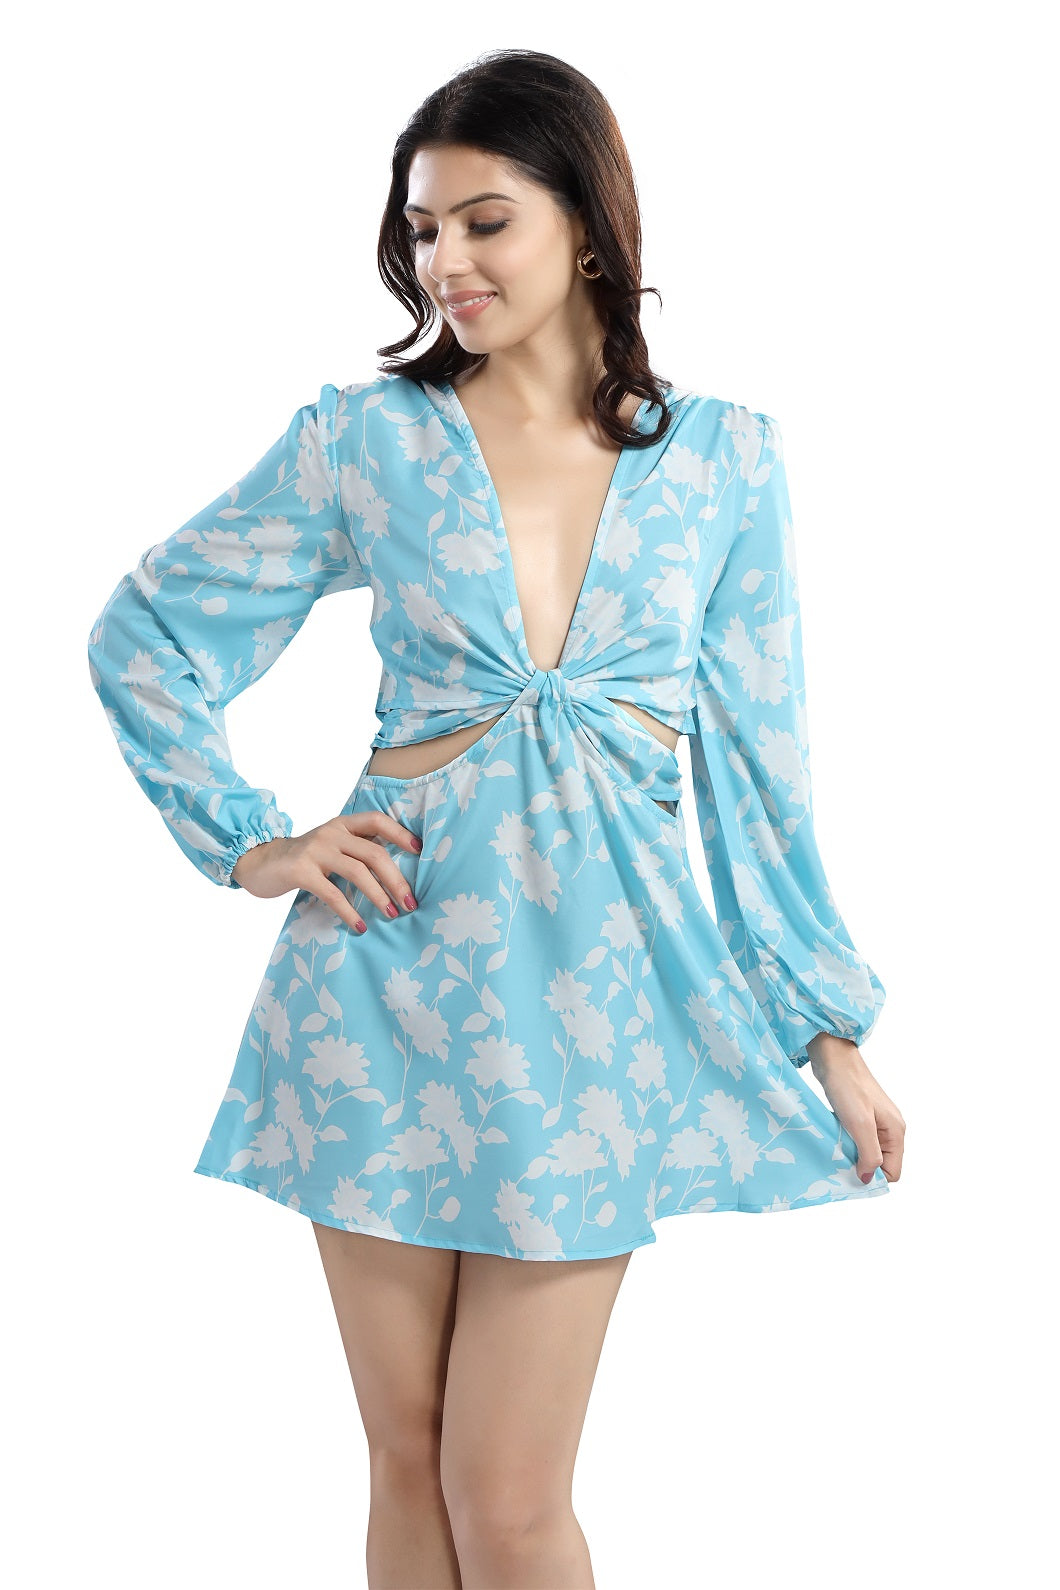 Cherrylavish Blue & White Floral Print Crepe Fit & Flare Dress With Cut-outs